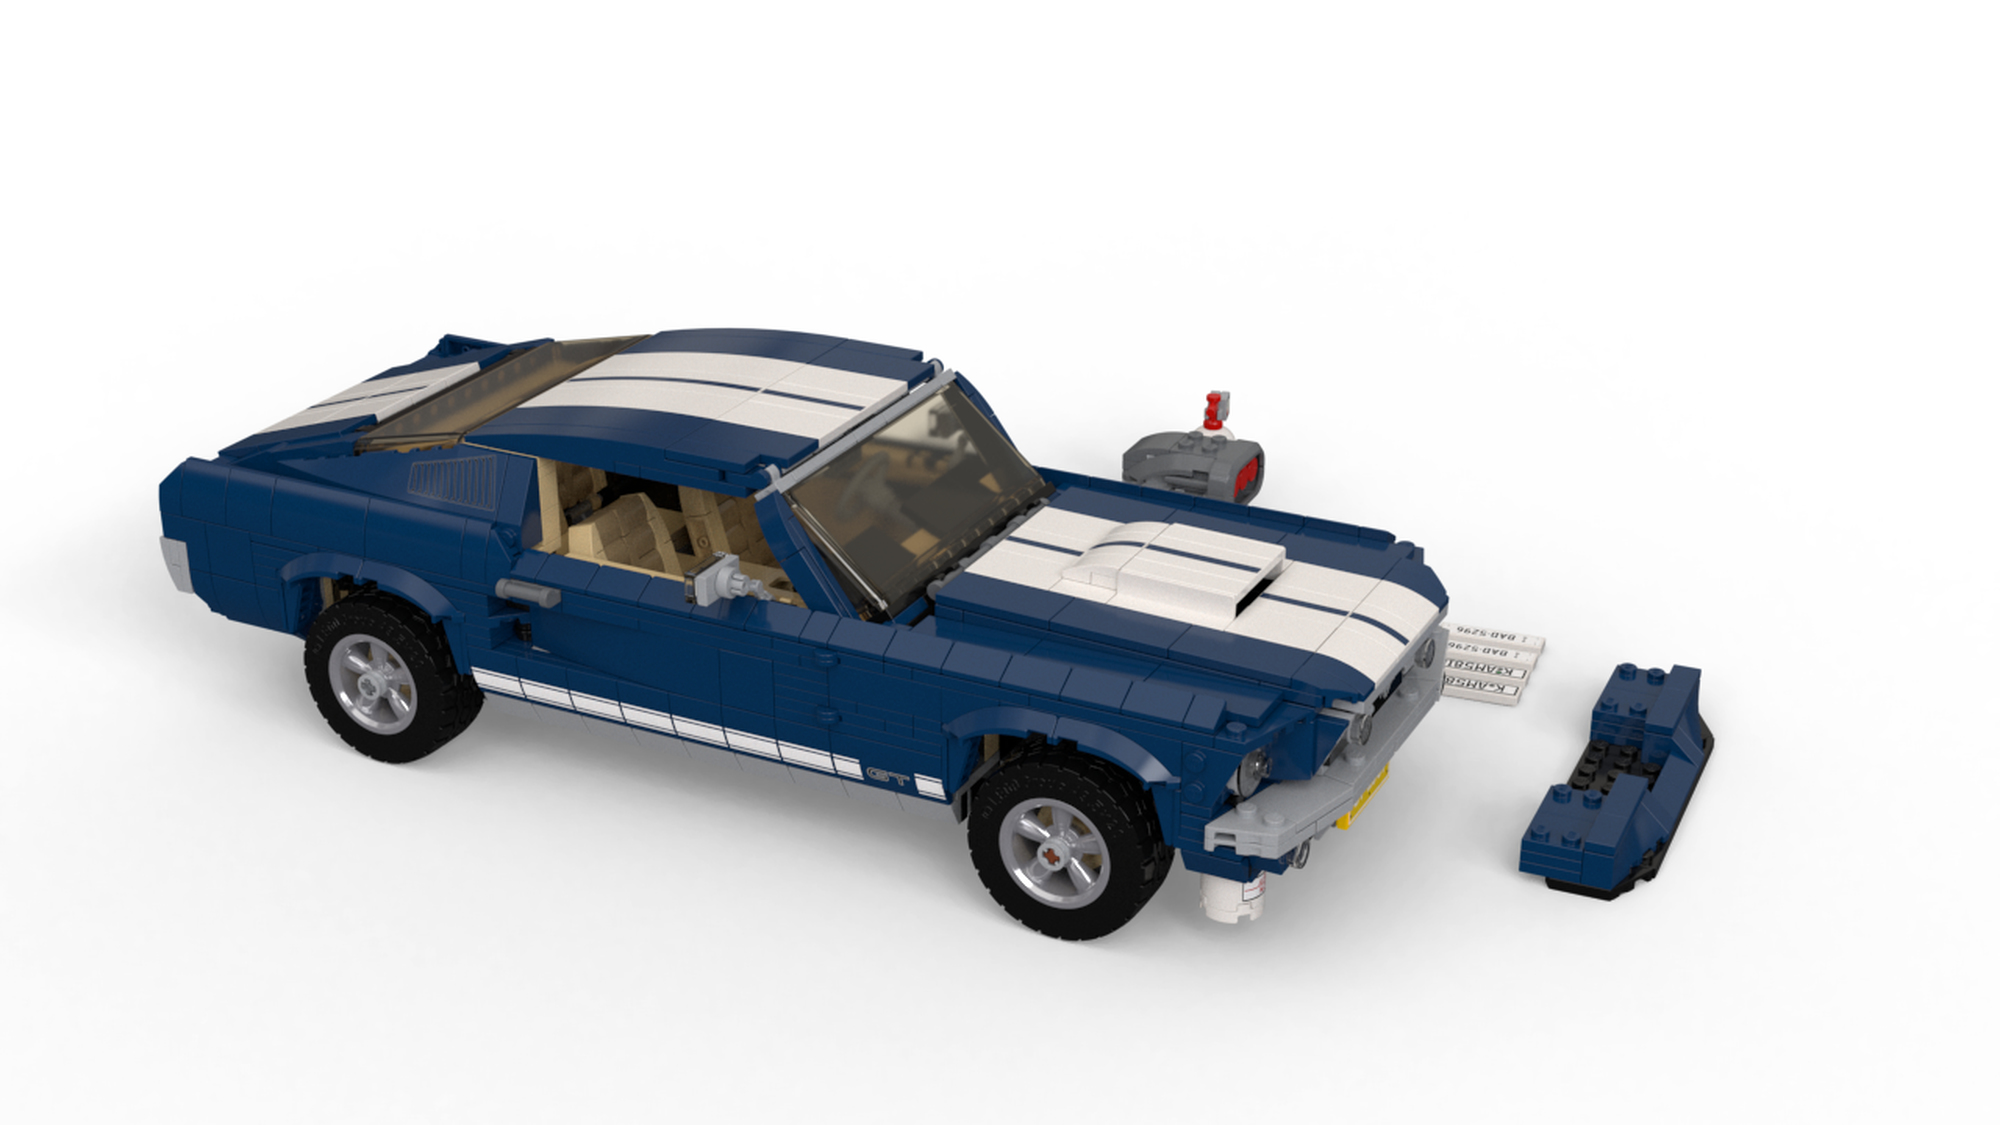 LEGO 10265 Ford Mustang GT, 5702016368260